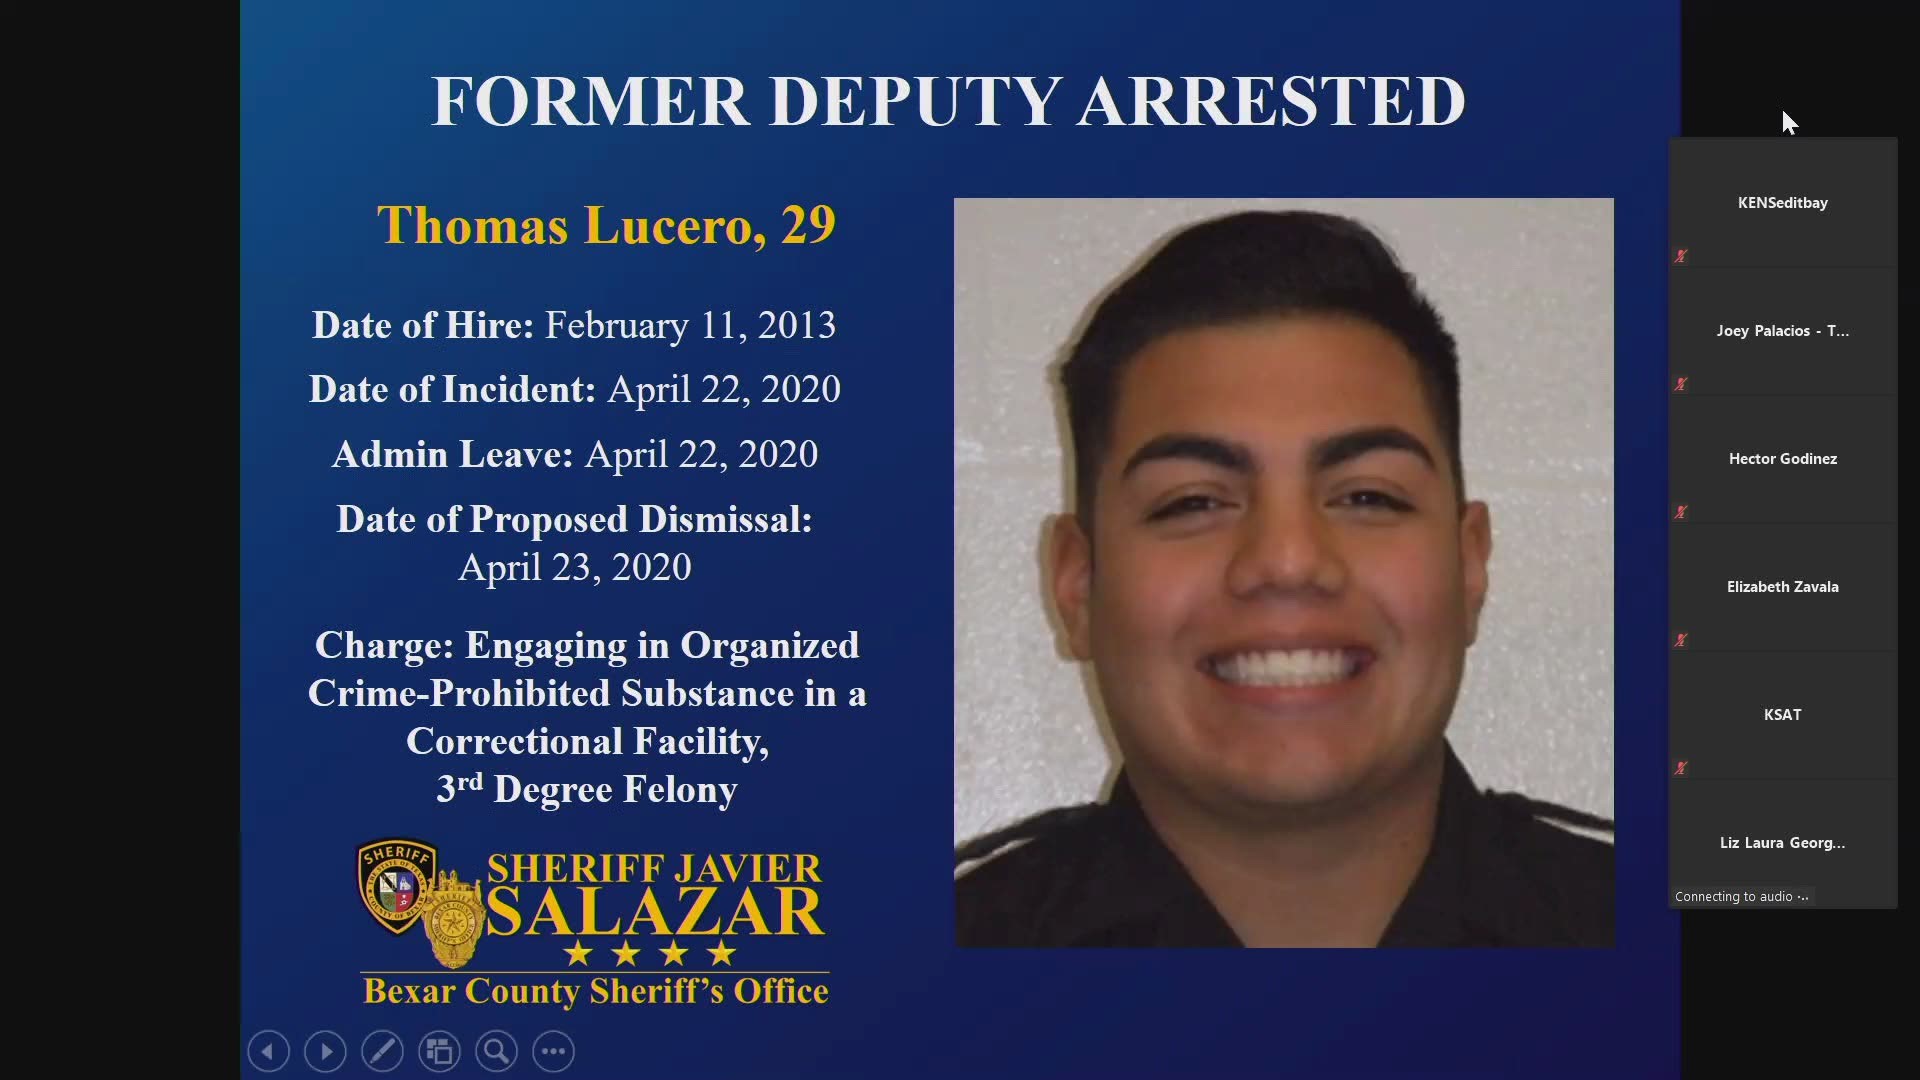 Sheriff Javier Salazar discusses the arrest of former deputy Thomas Lucero, who was arrested and indicted Monday on an Organized Crime charge.